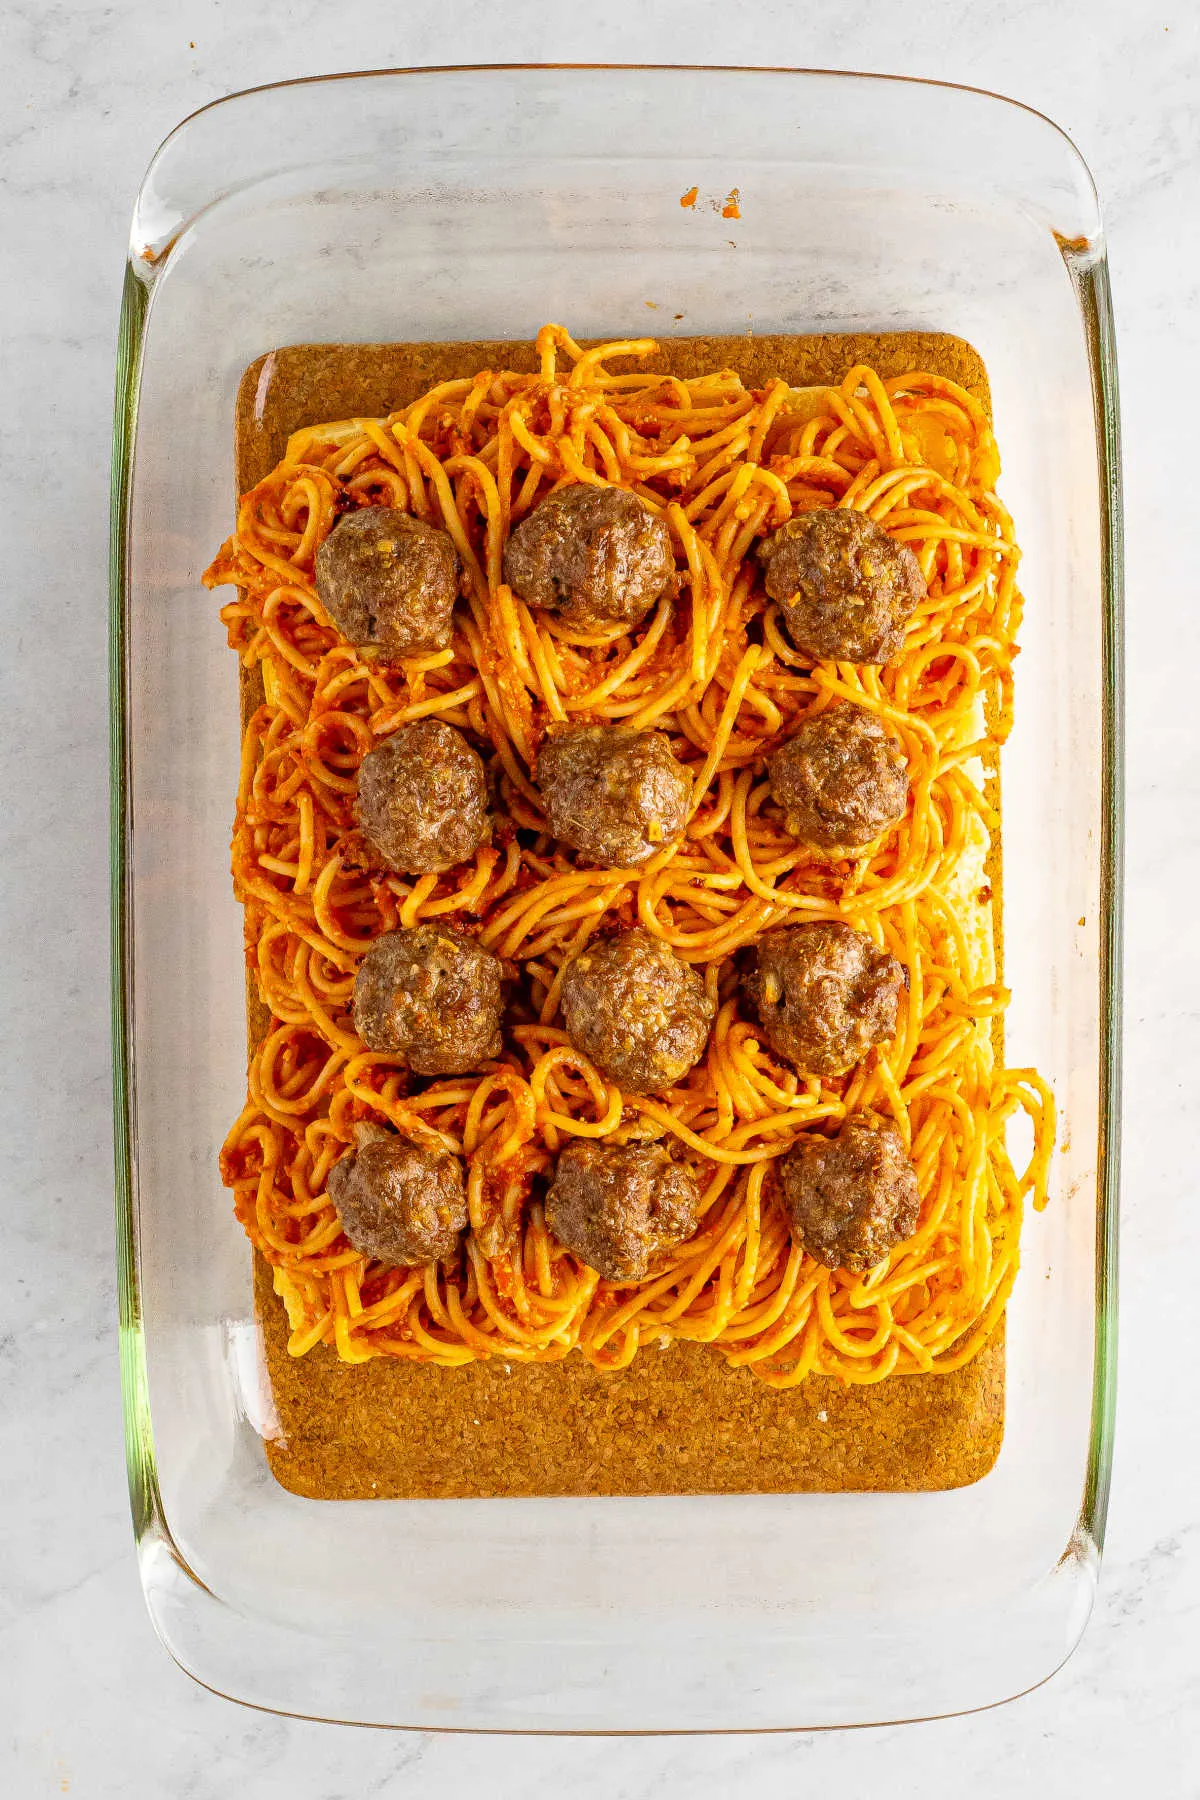 Spaghetti tossed with marinara sauce and cooked meatballs arranged over the bottom half of the sweet rolls in a 9x13-inch pan.